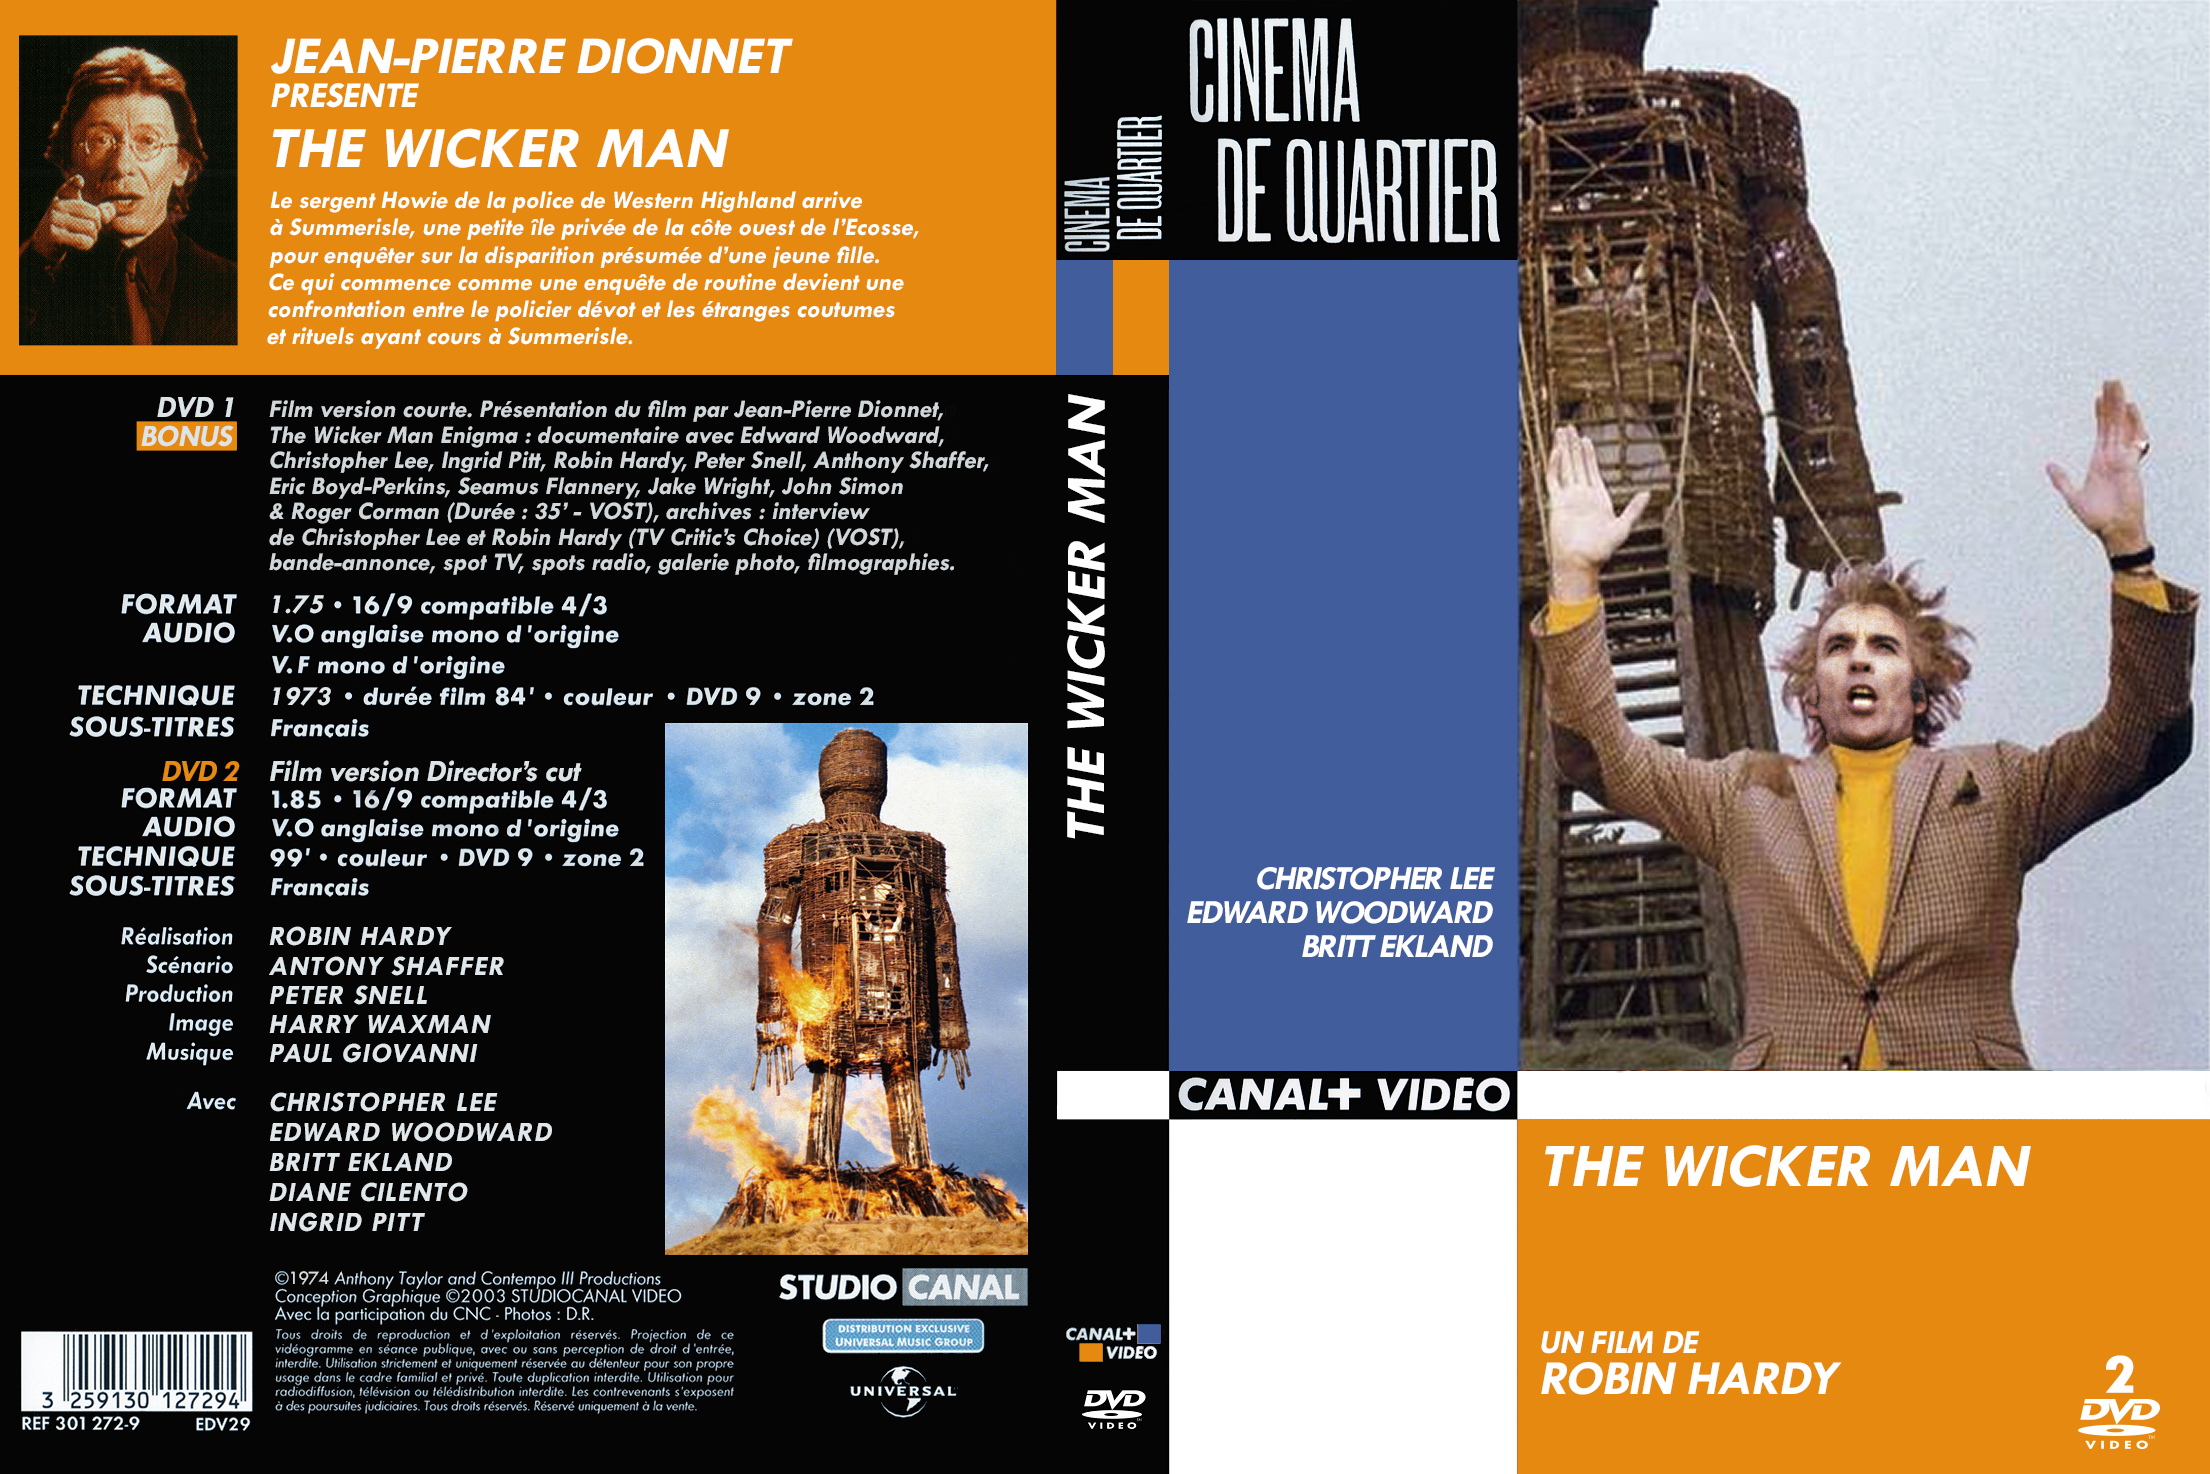 Jaquette DVD The wicker man (1974) v2